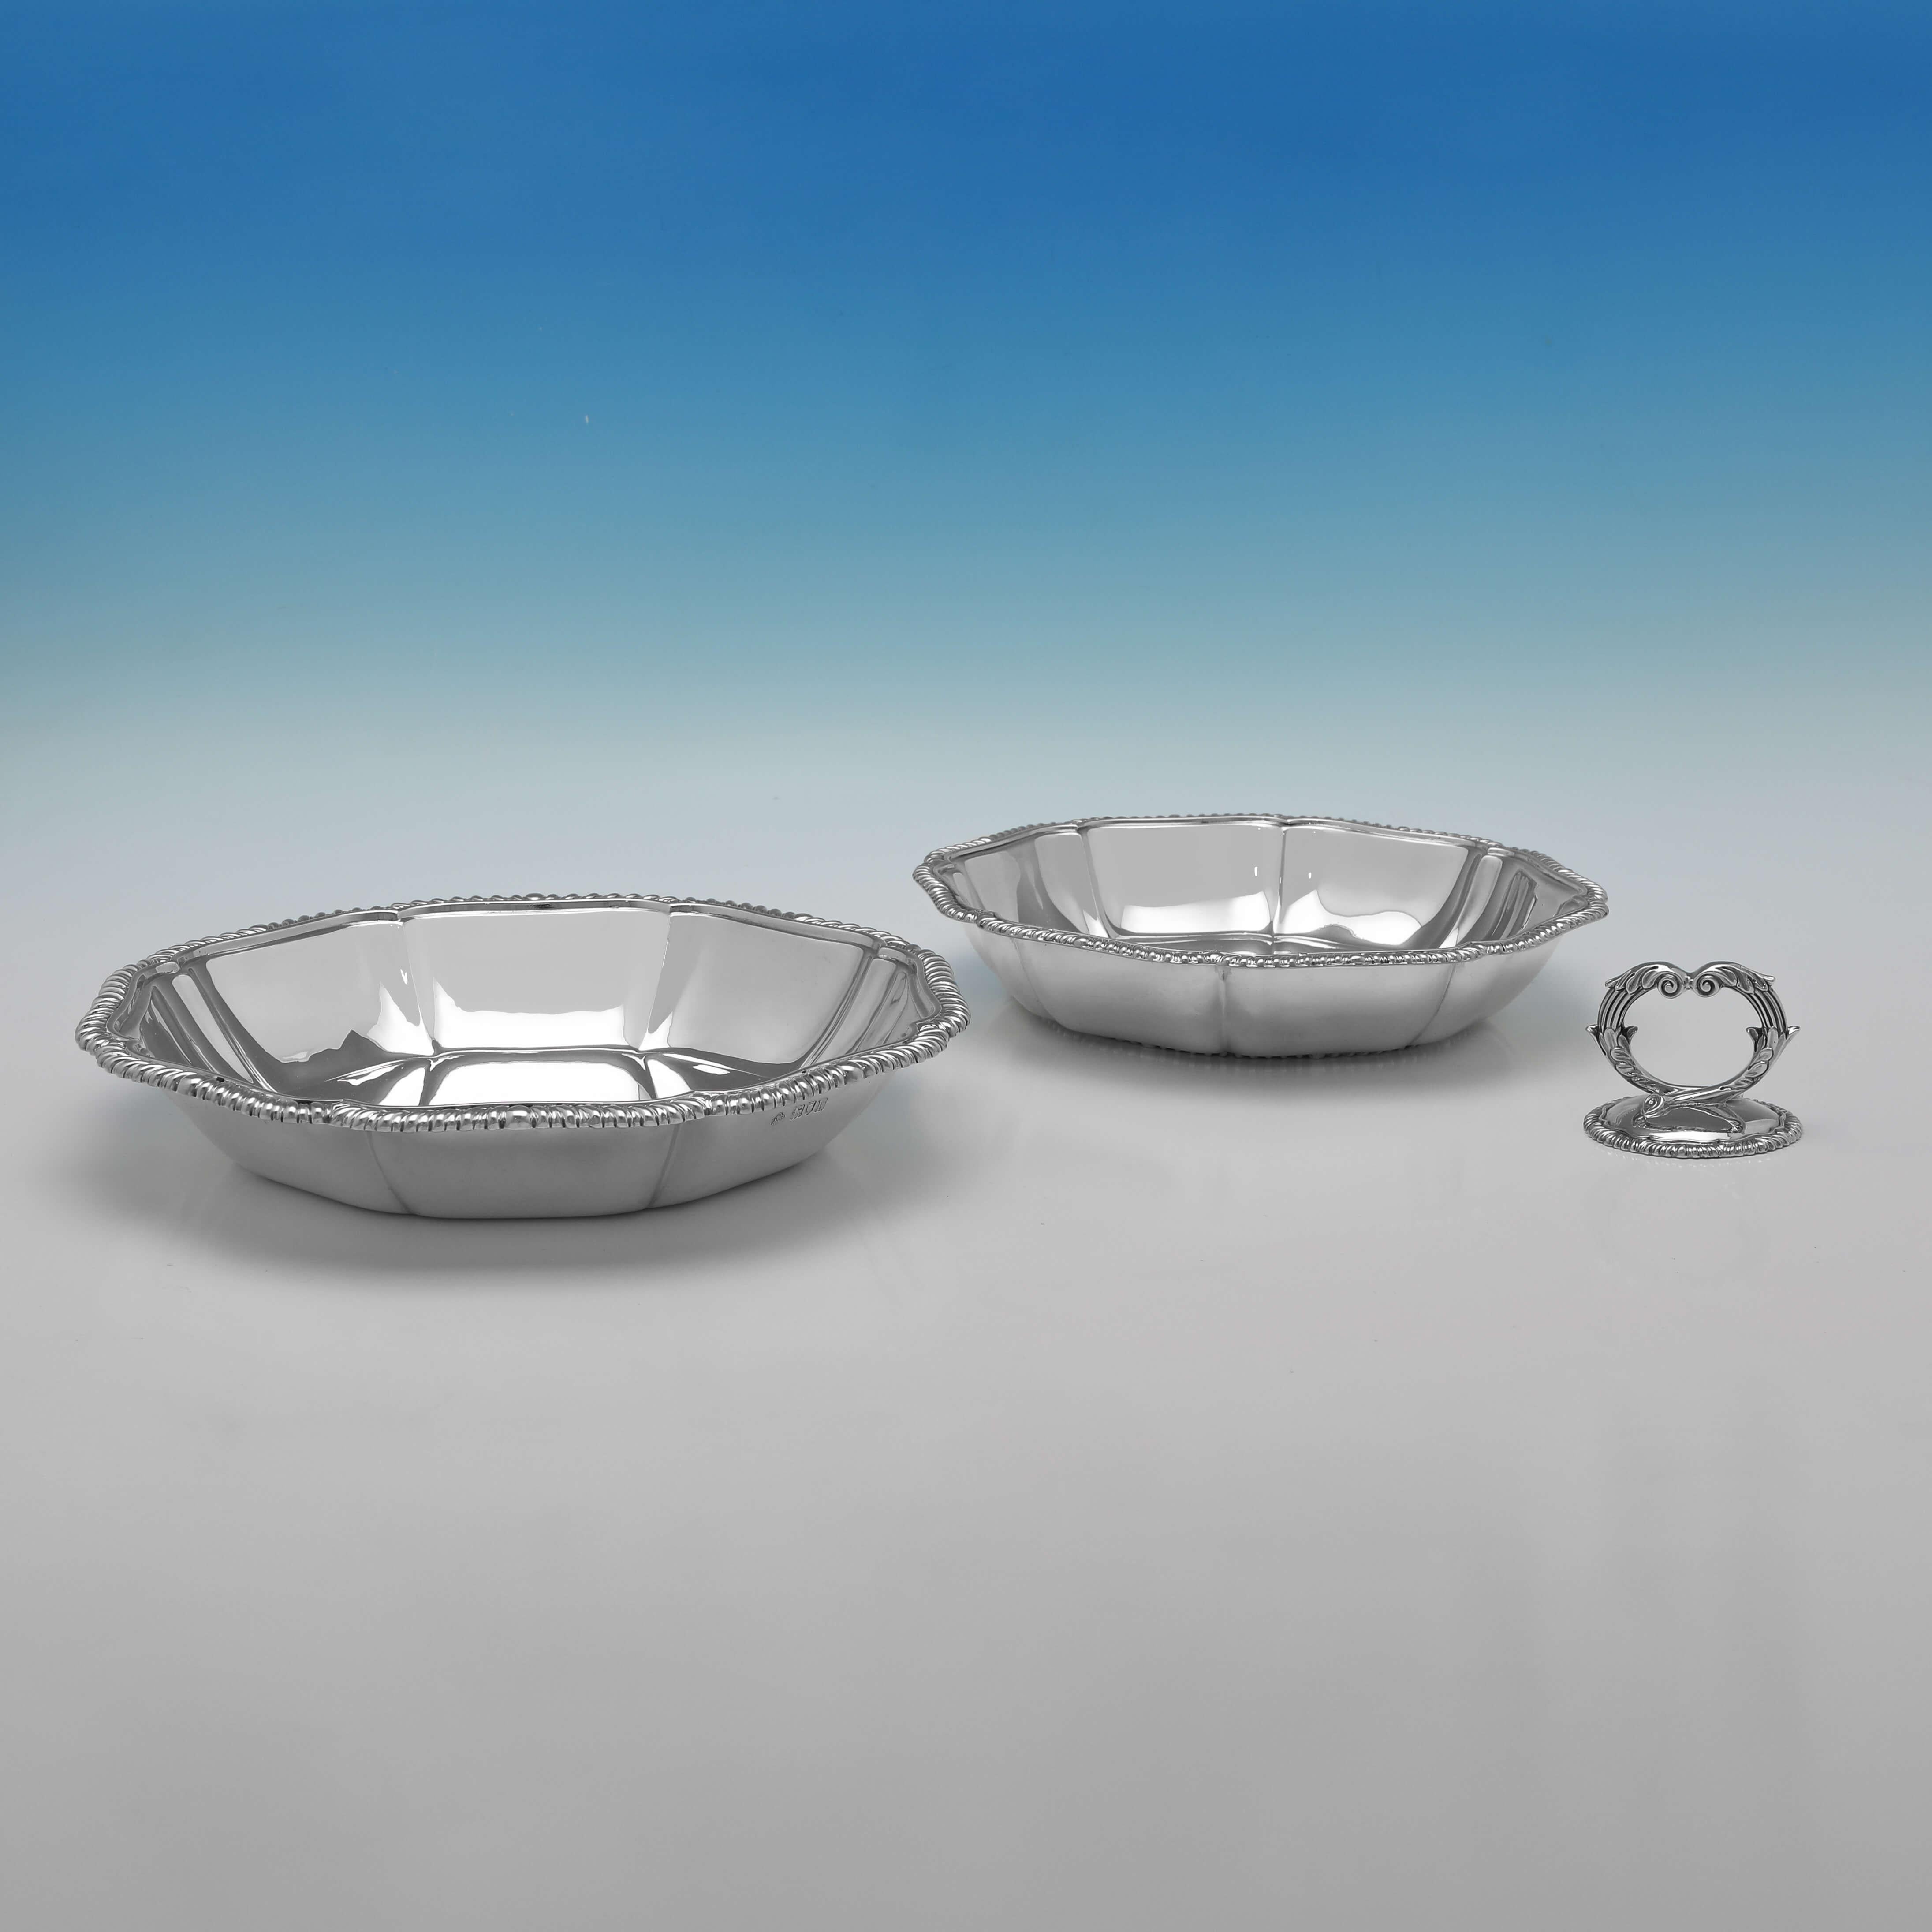 Early 20th Century Edwardian Sterling Silver Pair of Serving Dishes - Entree Dishes - London 1905 For Sale